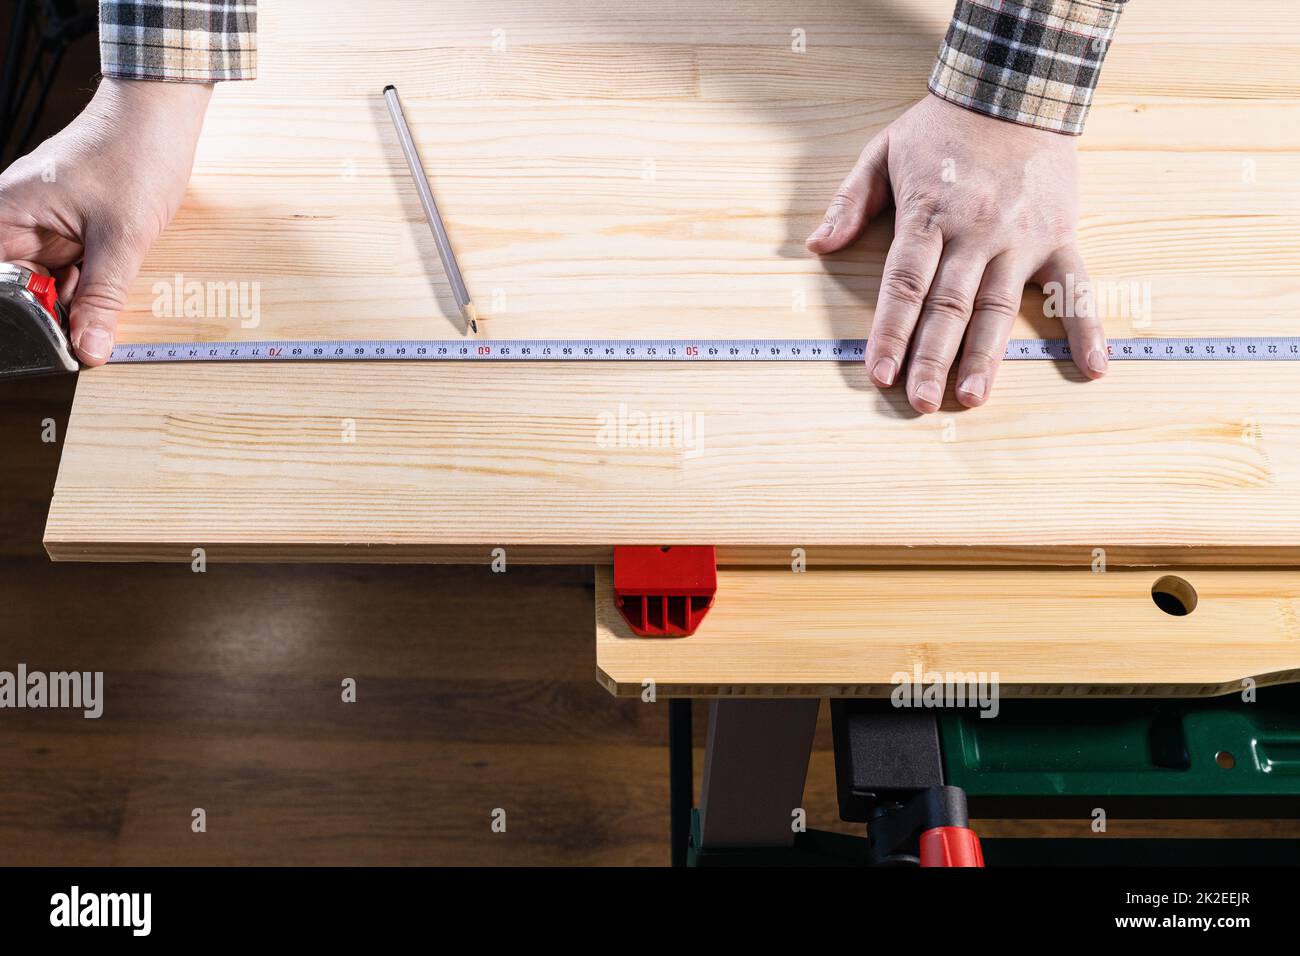 hands of carpenter measure size on wooden board Stock Photo